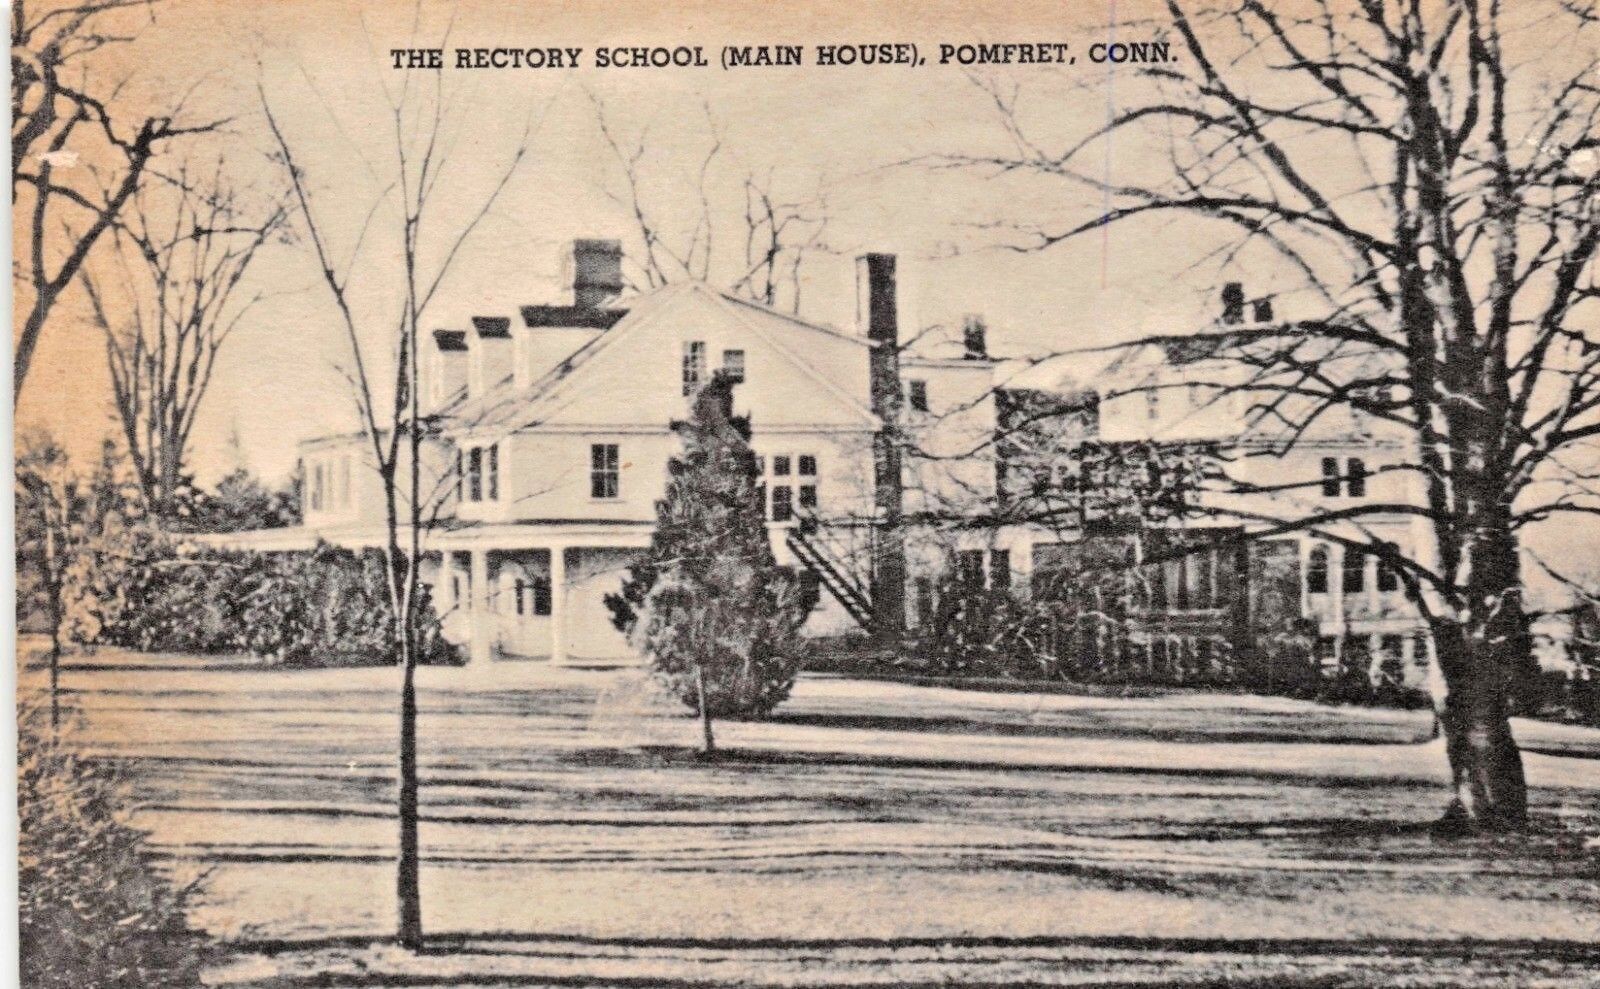 POMFRET CONNECTICUT~THE RECTORY SCHOOL-MAIN HOUSE-COLLOTYPE PHOTO POSTCARD